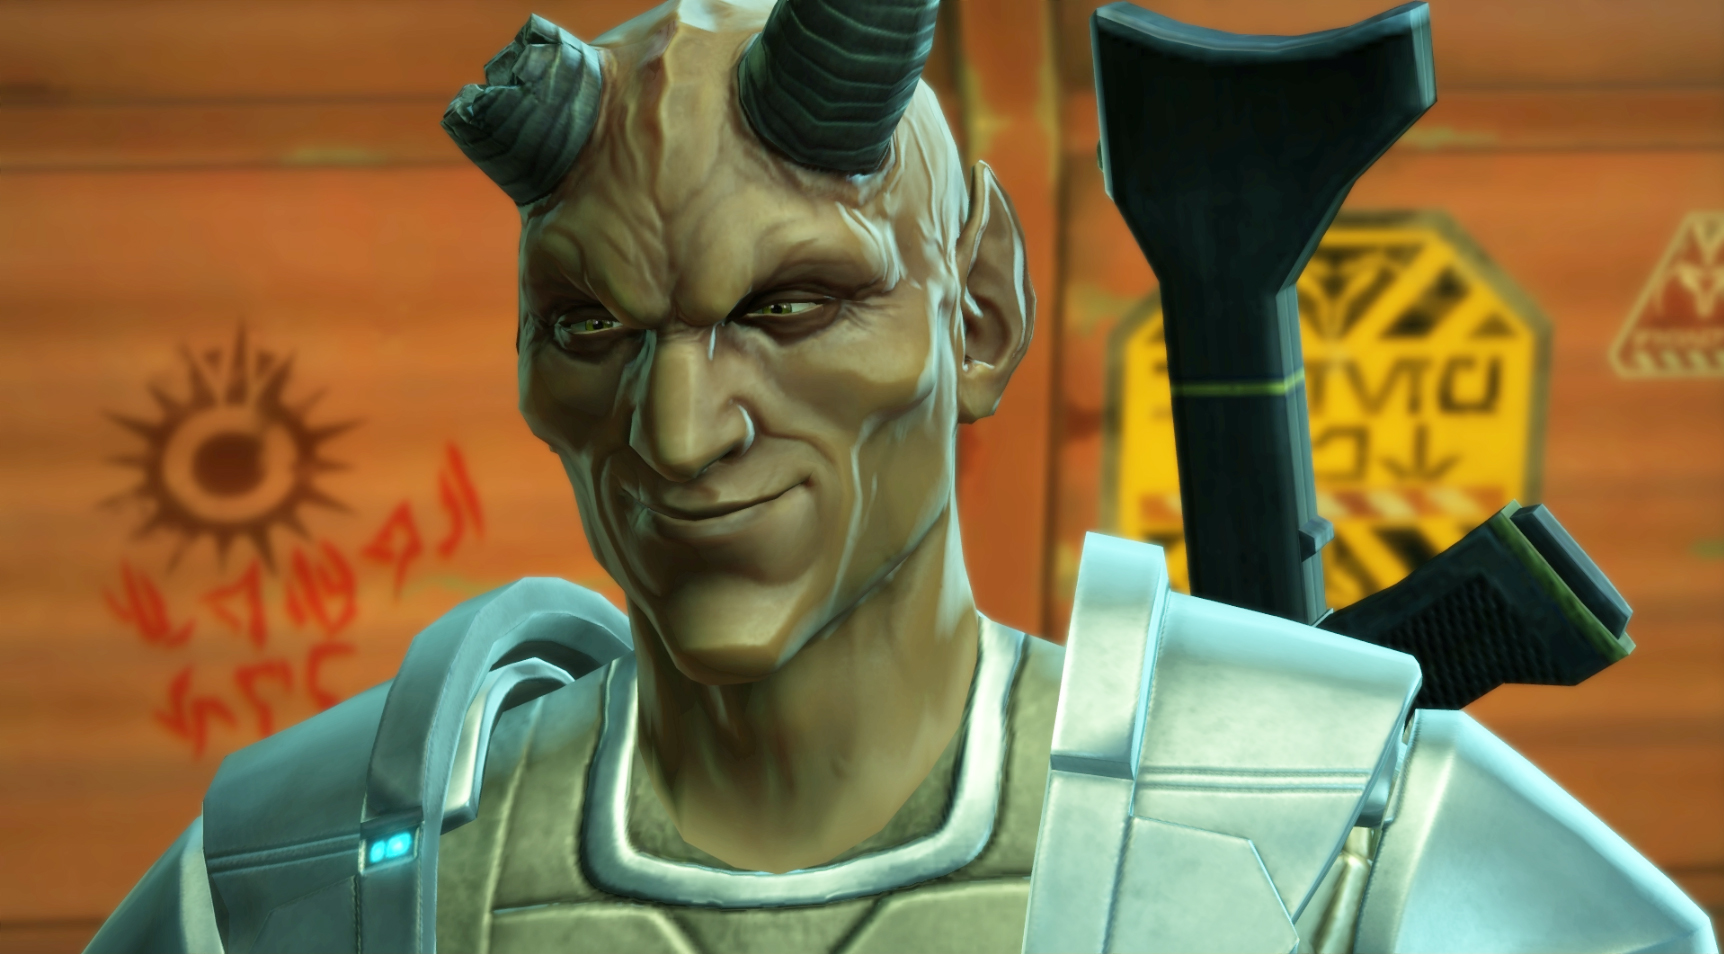 swtor kotfe profitandplunder gaultgrins Star Wars: The Old Republic - Knights of the Fallen Empire "Profit and Plunder" Released